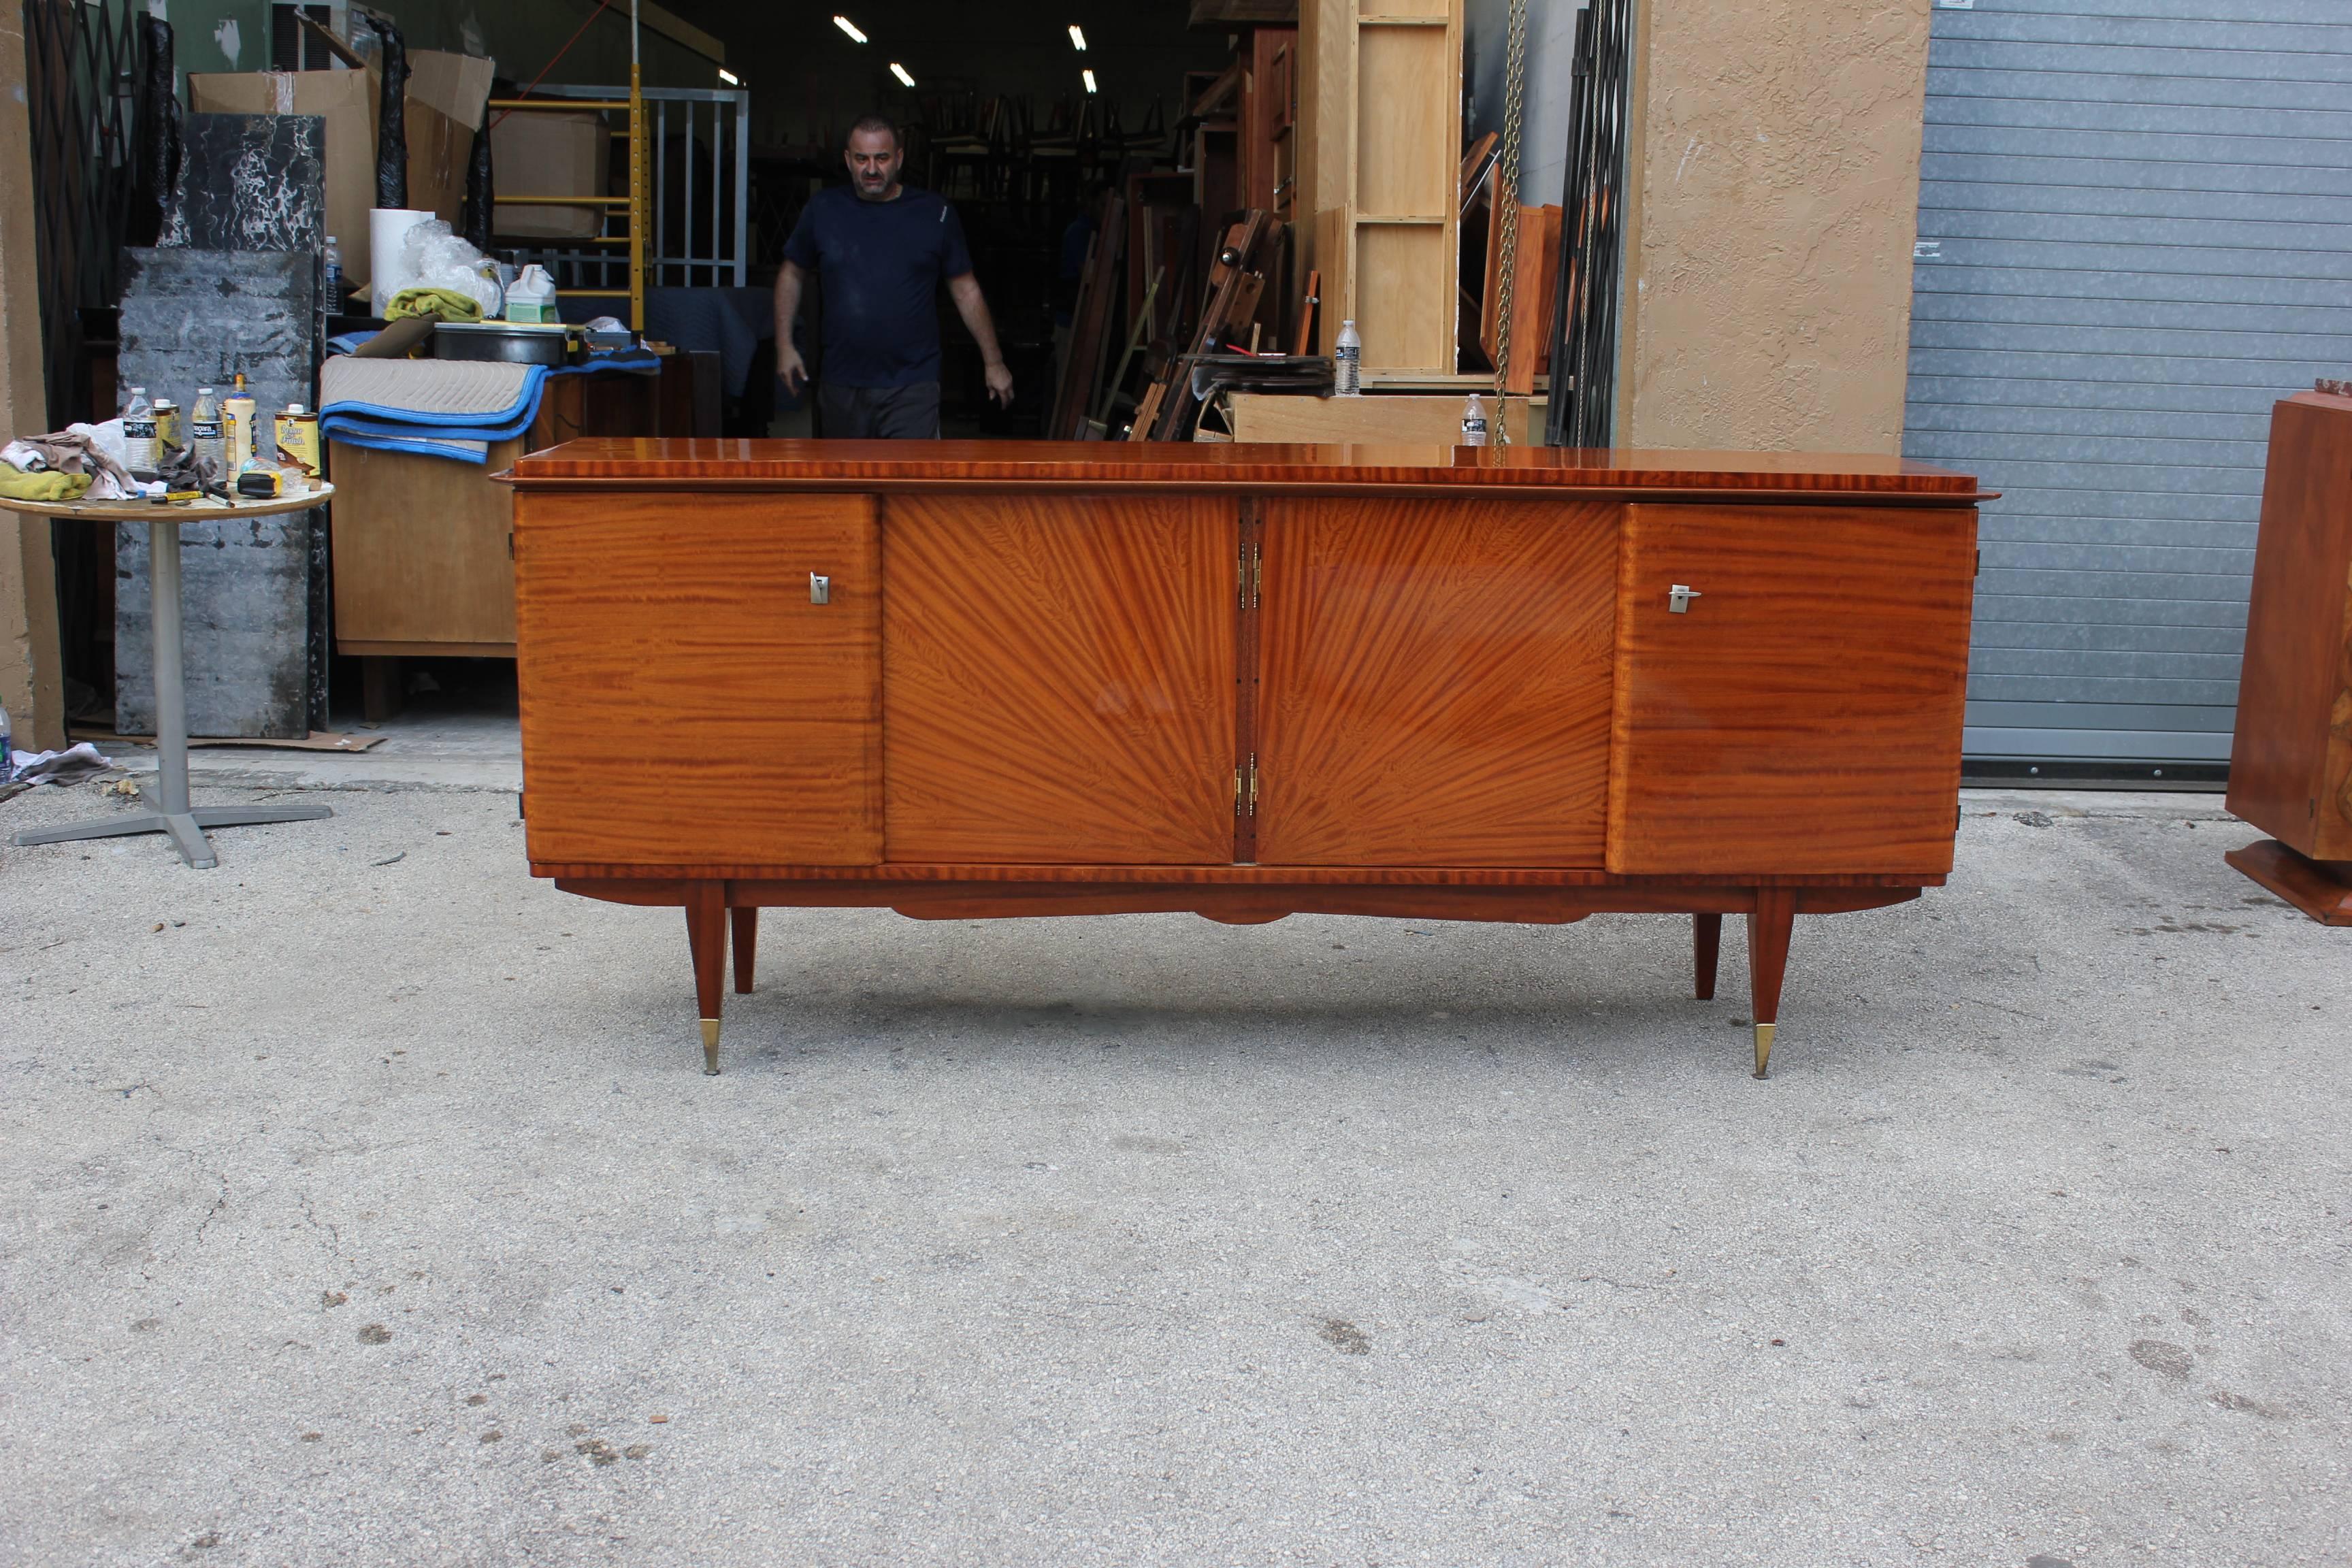 French Art Deco exotic mahogany sunburst sideboard, credenza or buffet high gloss finish and inside sycamore wood, please note these buffets can be taken apart to accommodate elevator needs if necessary.